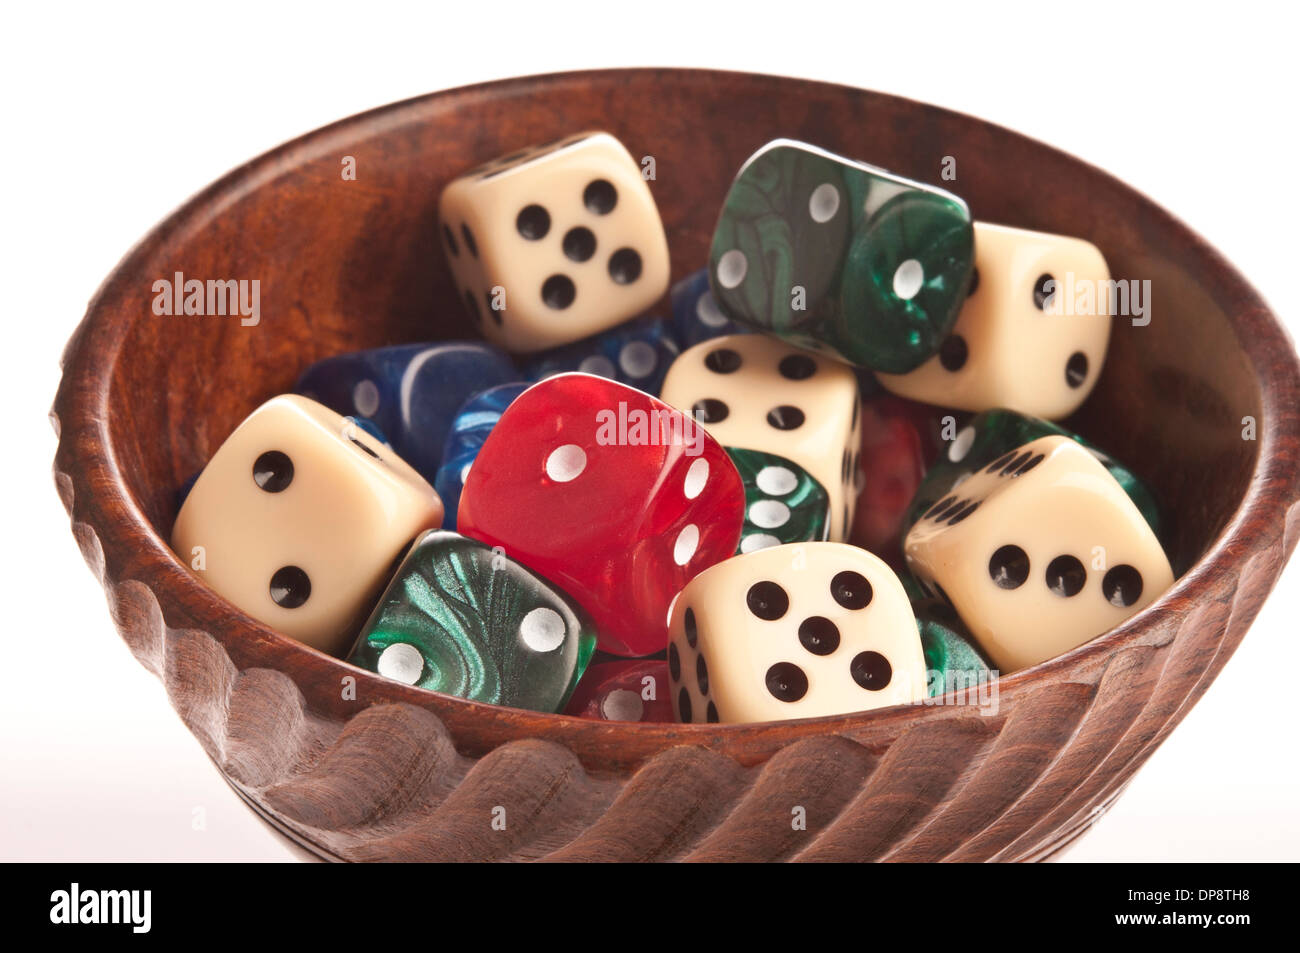 dice in a bowl Stock Photo